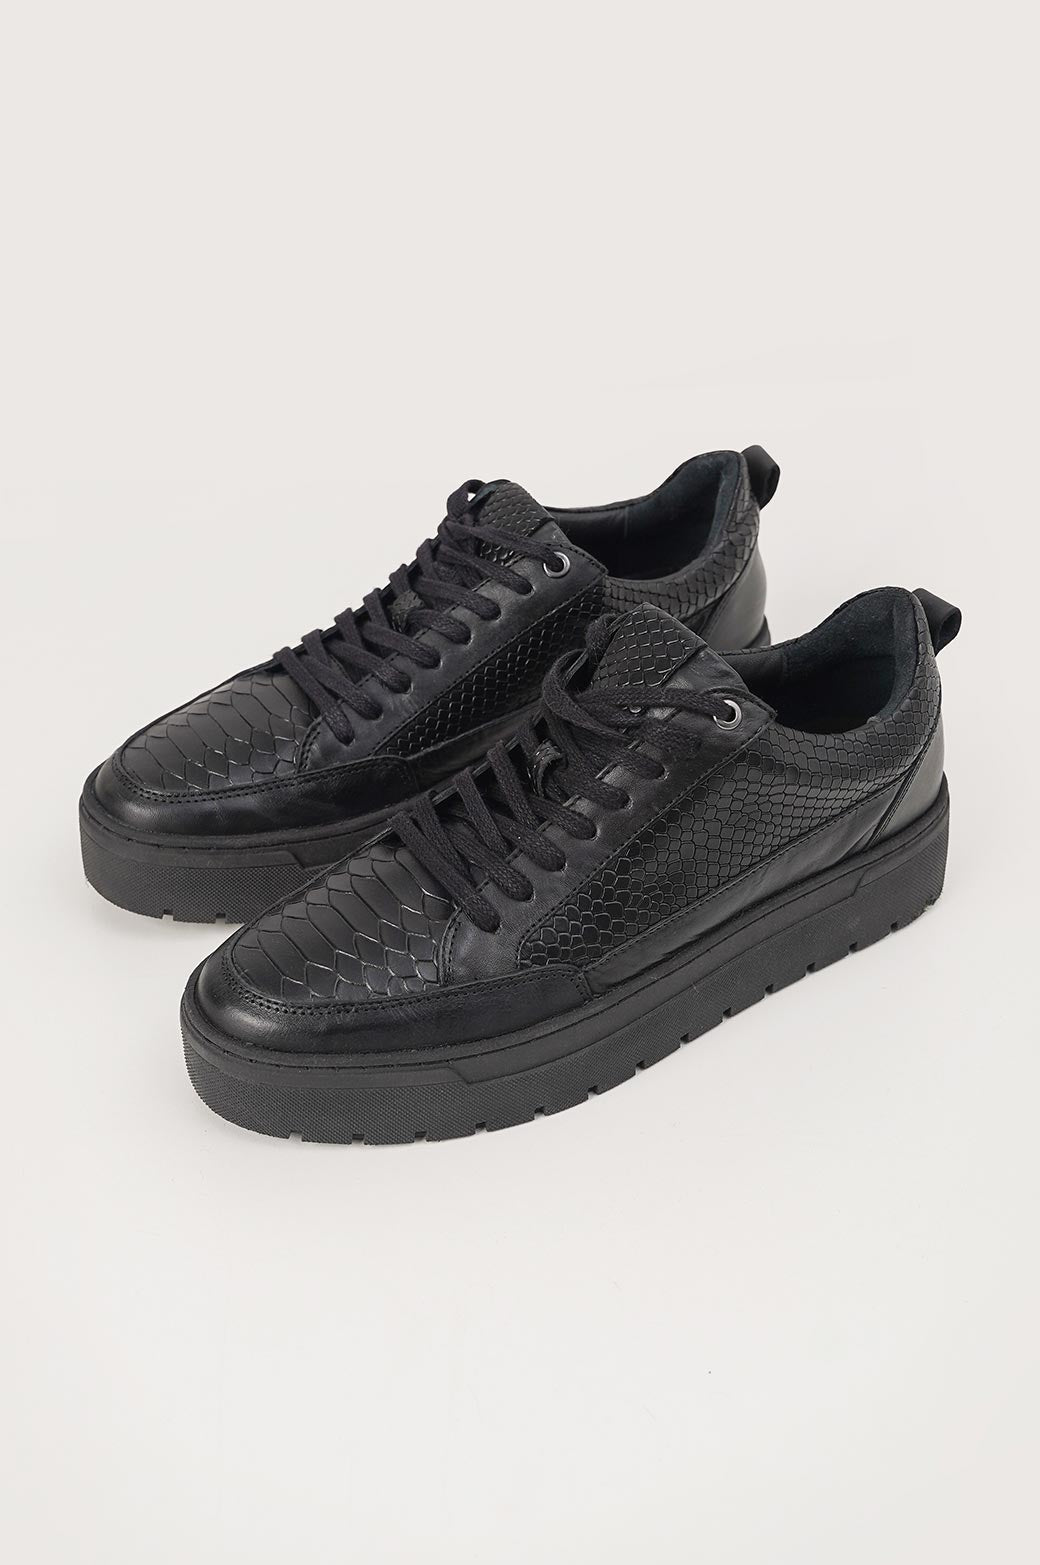 BLACK TEXTURED LEATHER SNEAKERS